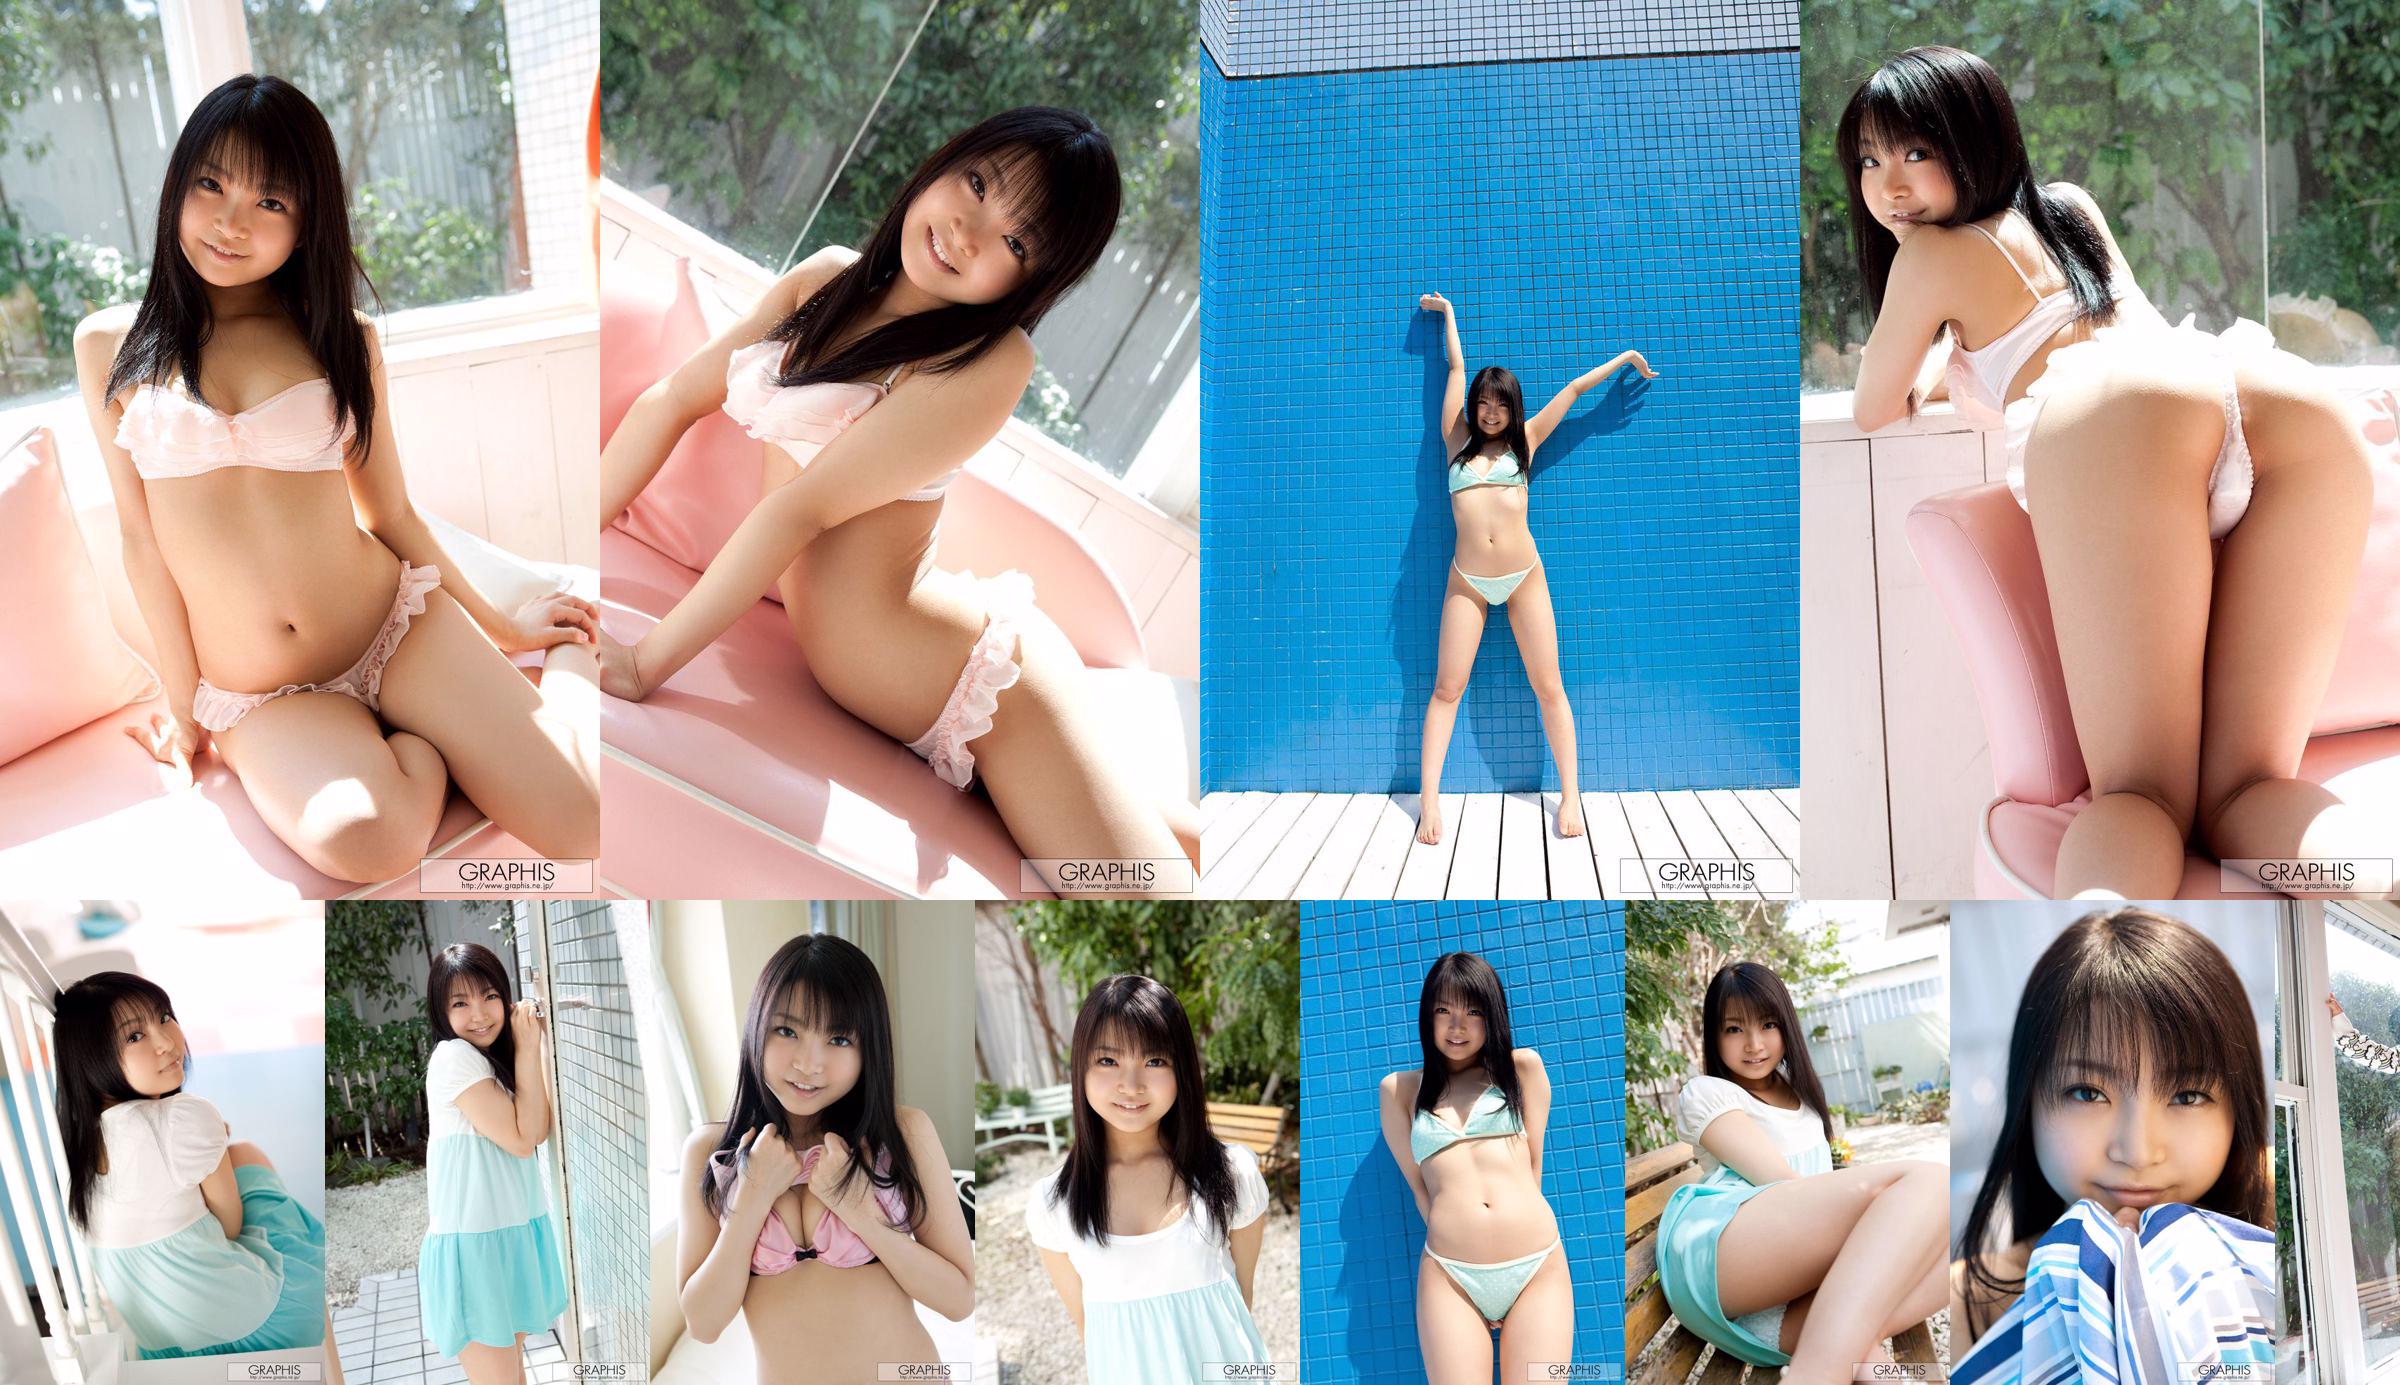 Chihiro Aoi / Chihiro Aoi [Graphis] First Gravure First off daughter No.cbeb07 Page 1